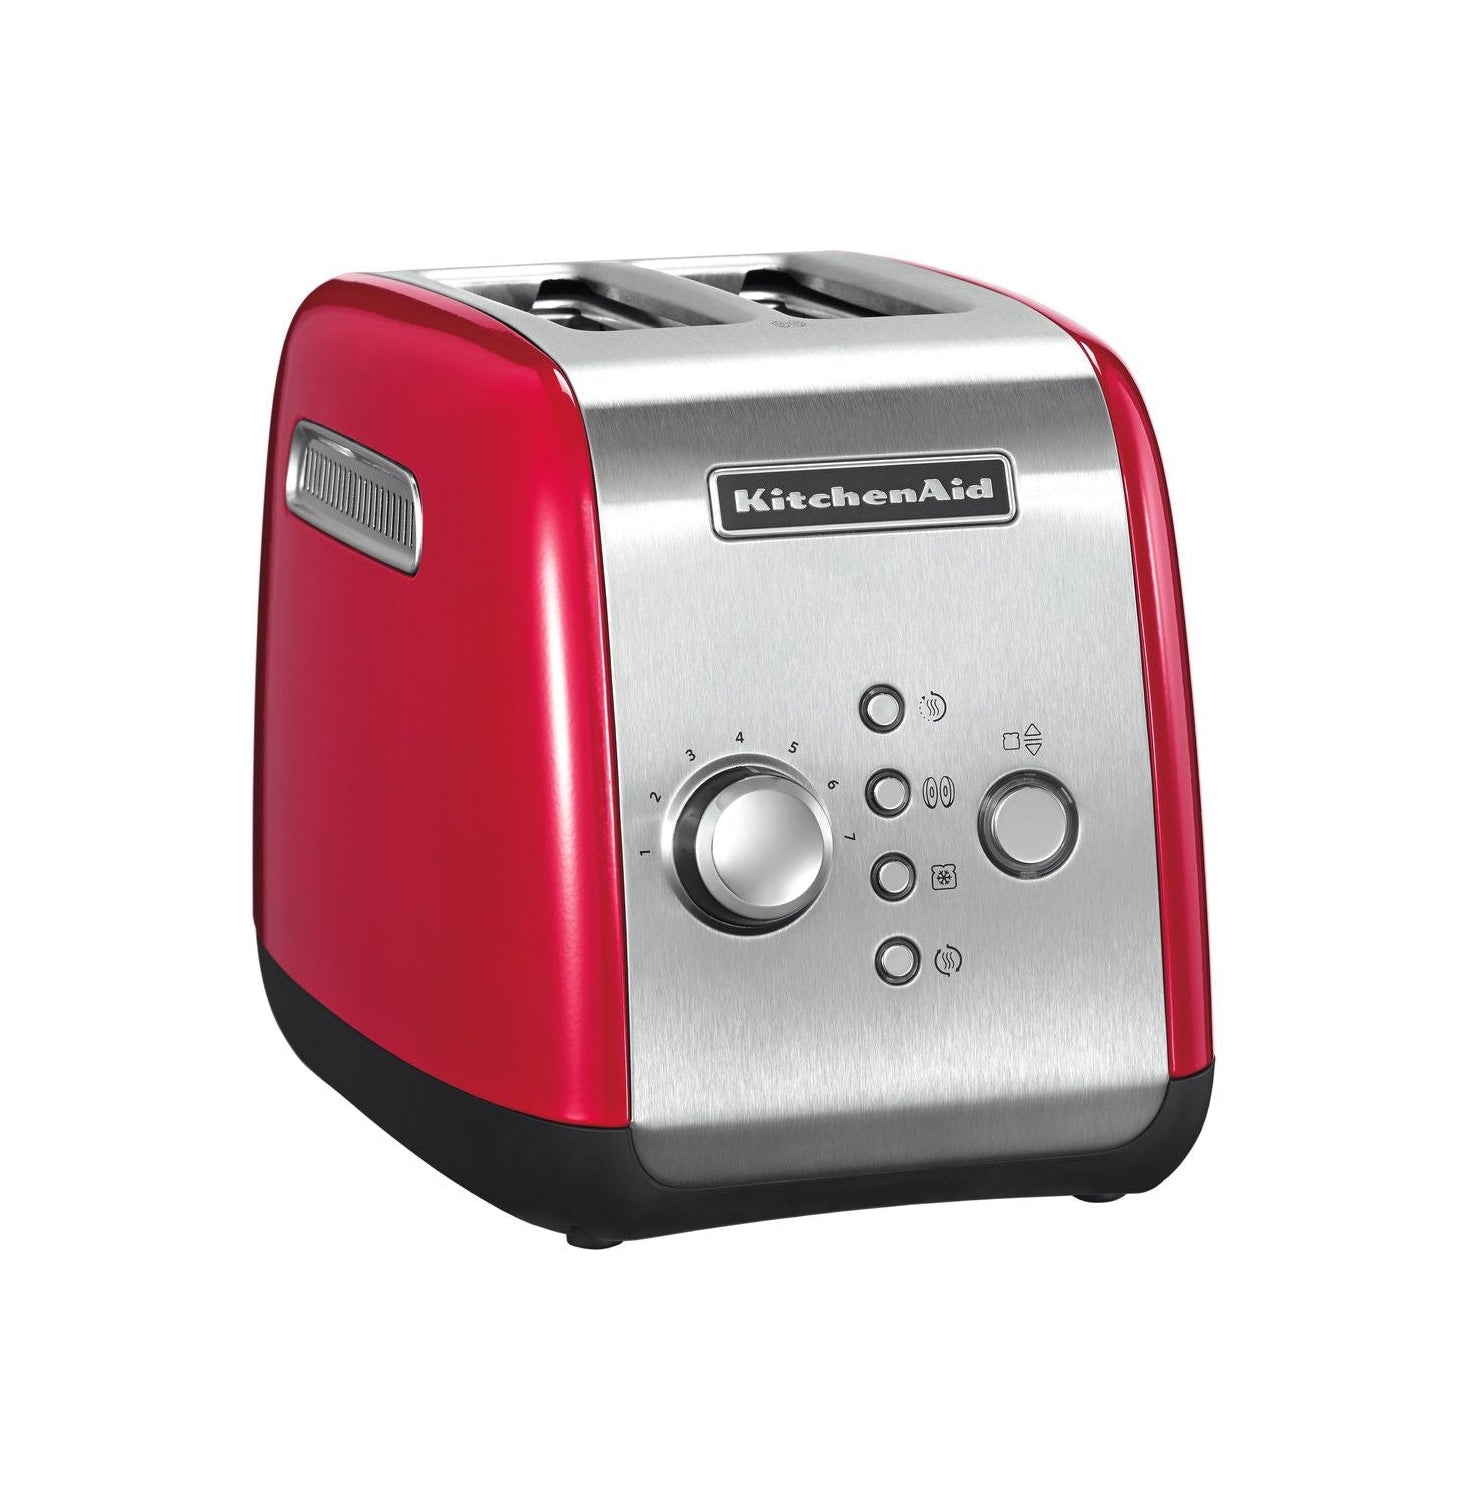 Kitchen Aid 5 Kmt221 Automatic Toaster For 2 Slices, Empire Red